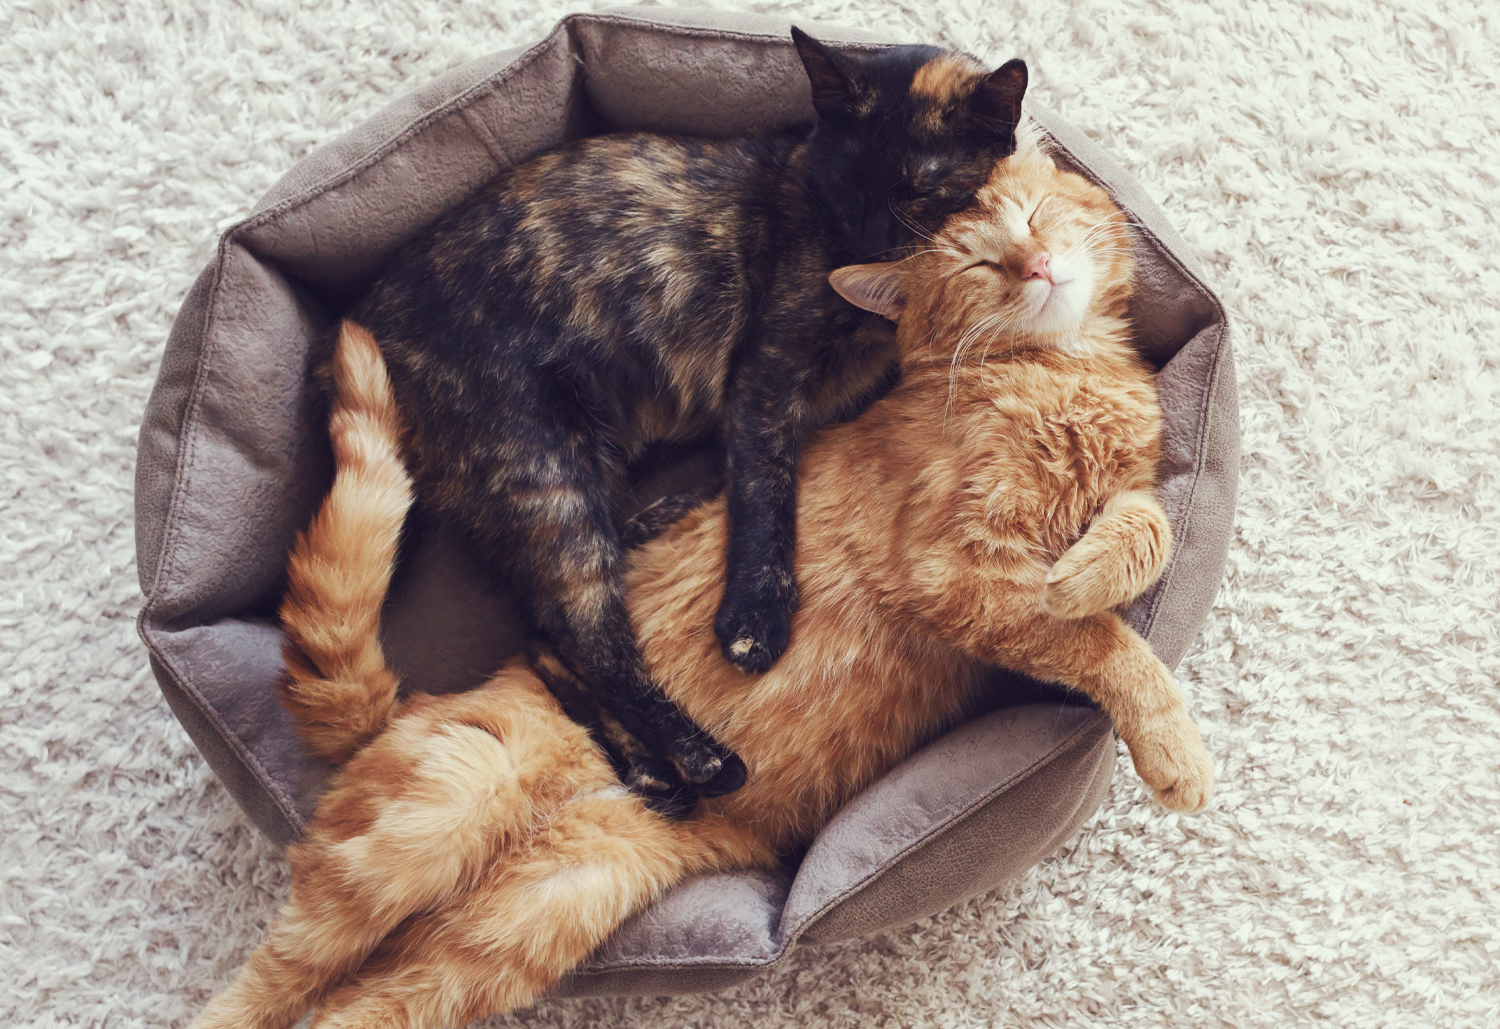 Two Cats Cuddling - How to introduce a new cat to your other cat, so they get along